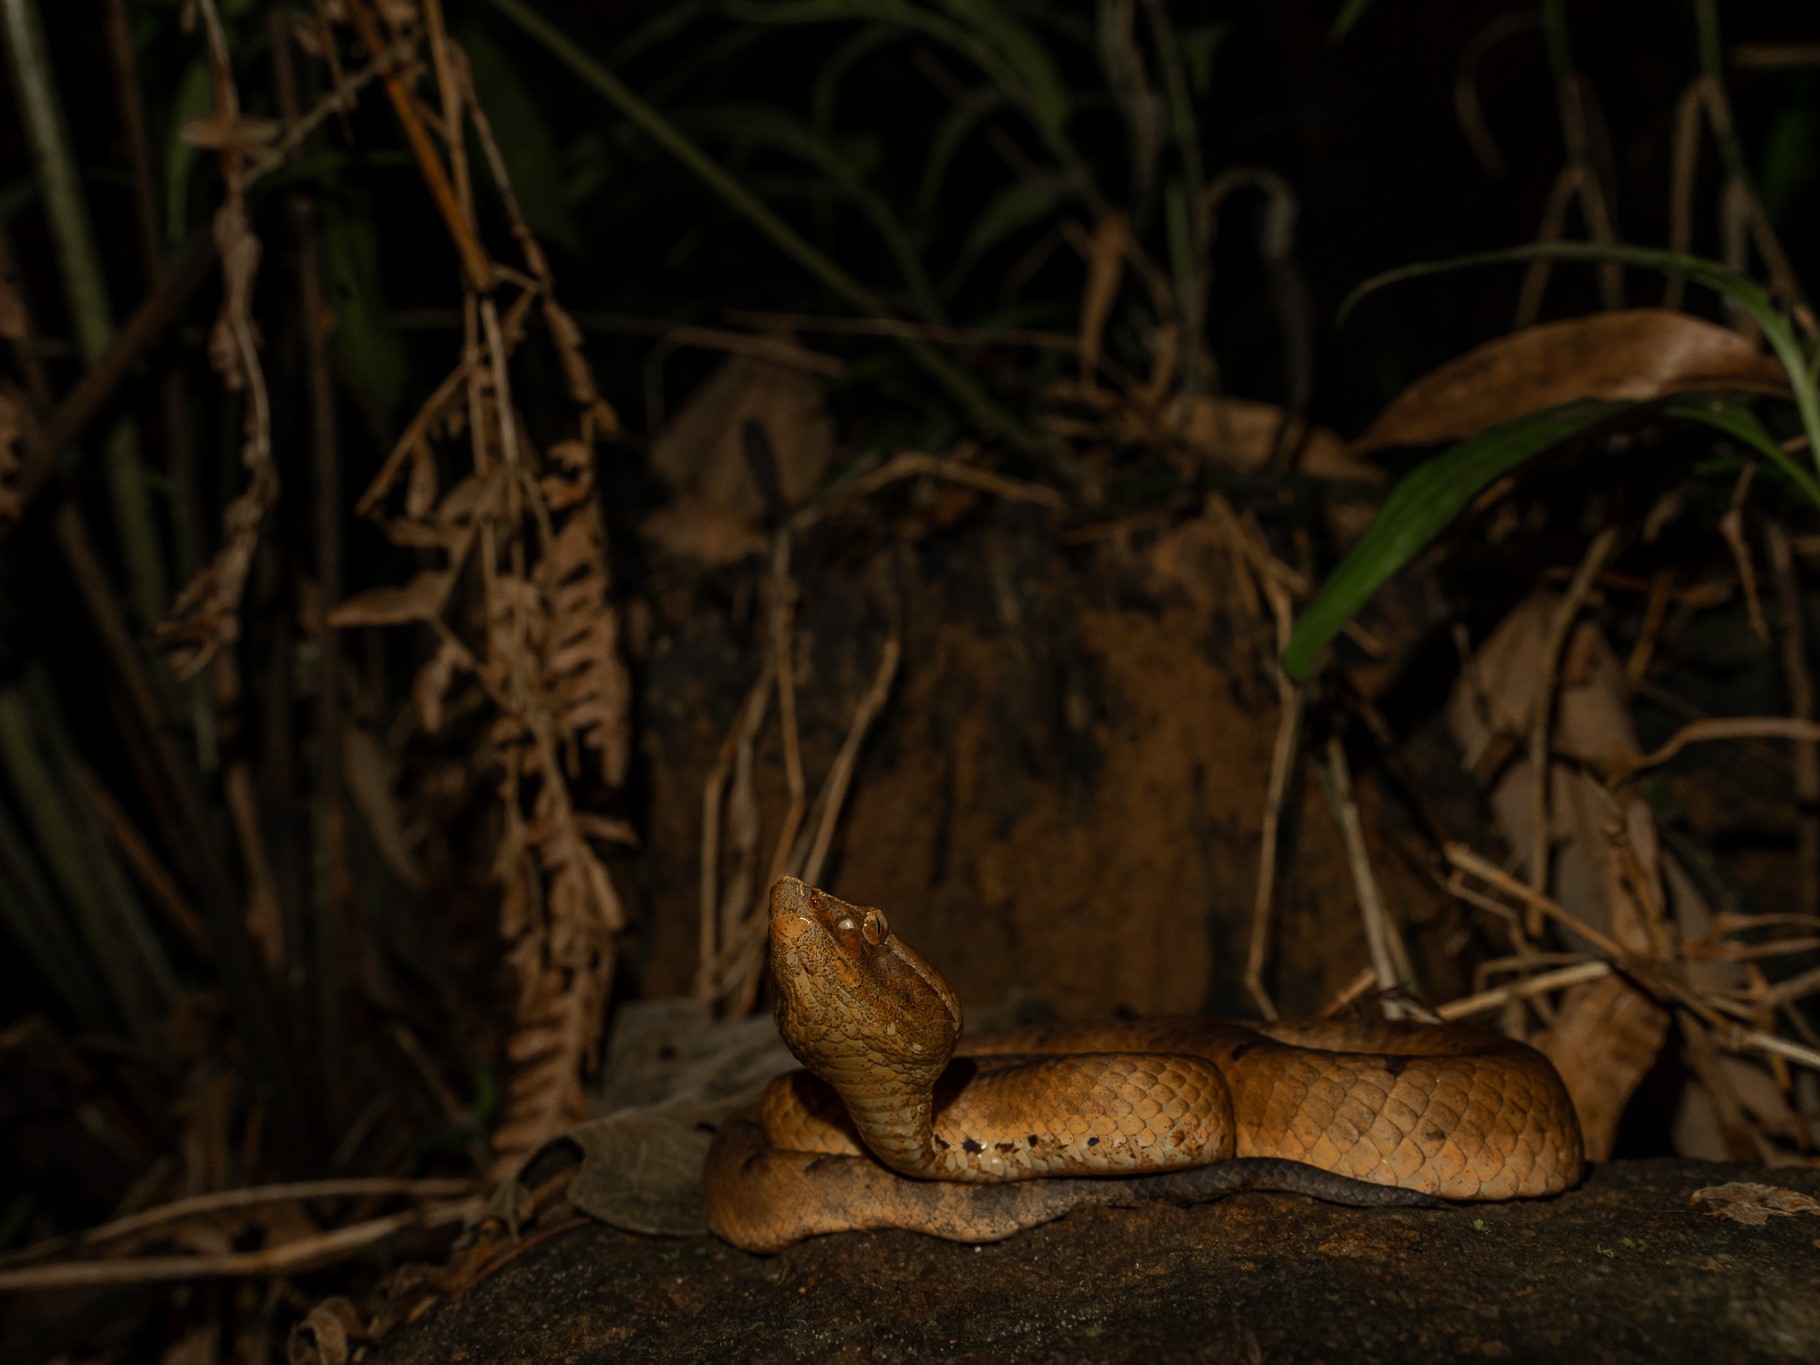 Humpnosed viper from the Western Ghats